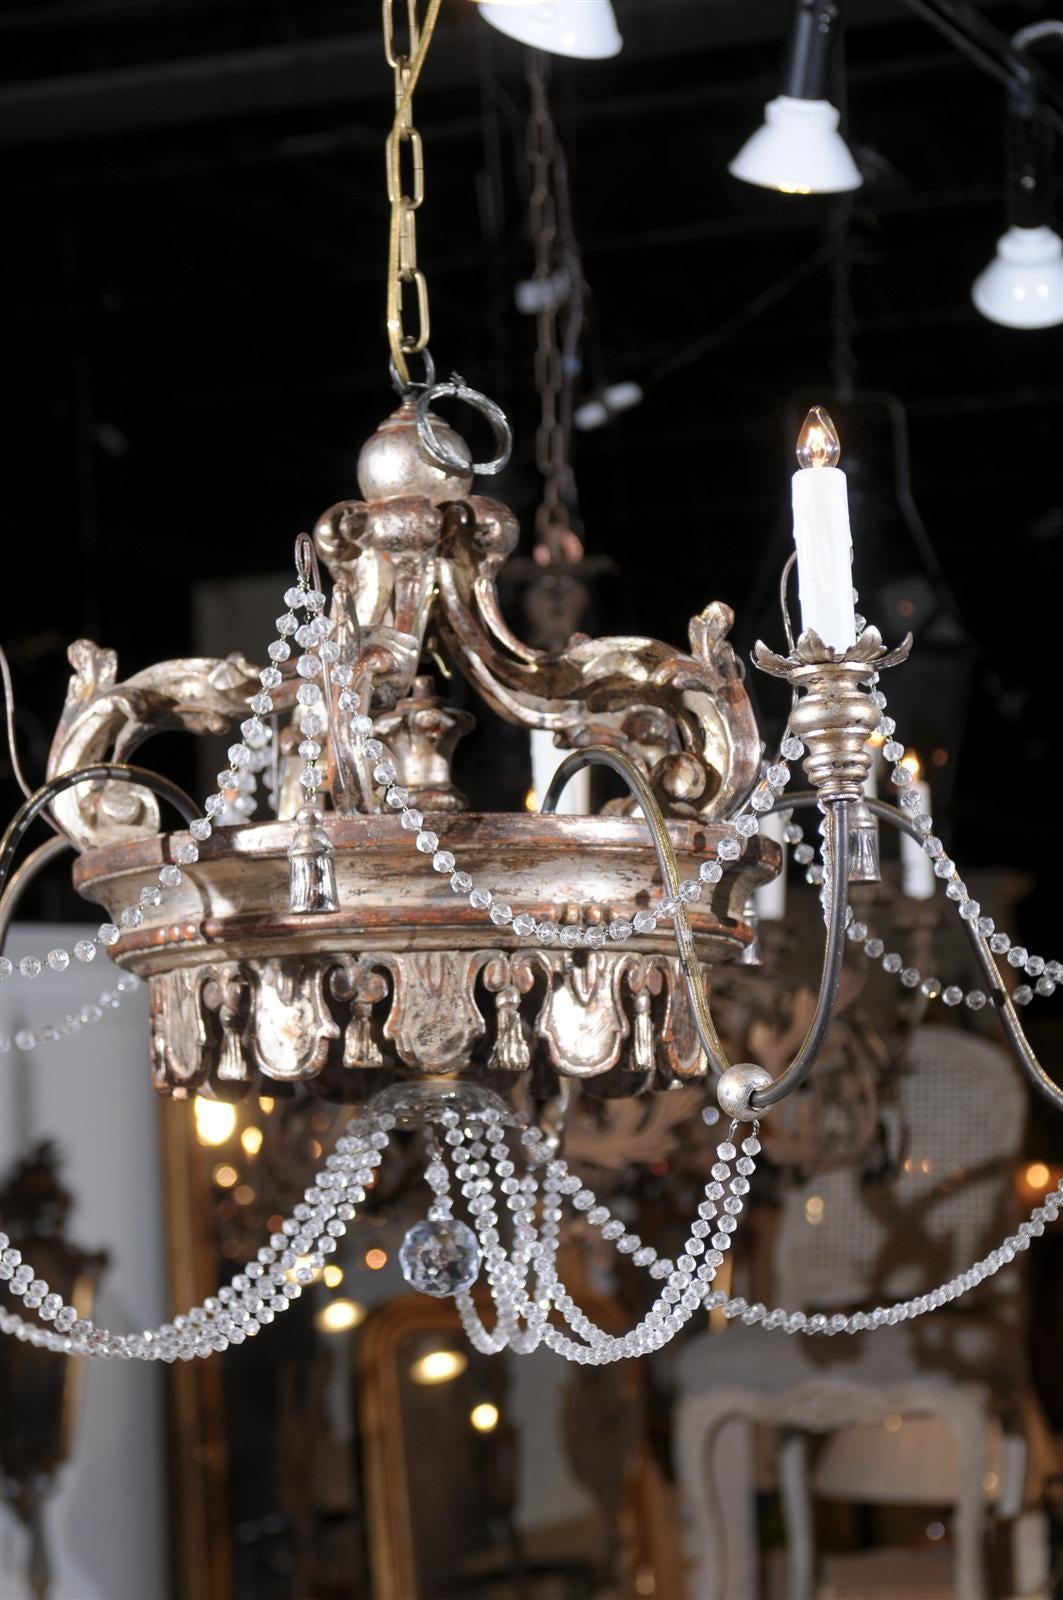 Italian silvergilt crown chandelier with crystal swags and five arms.